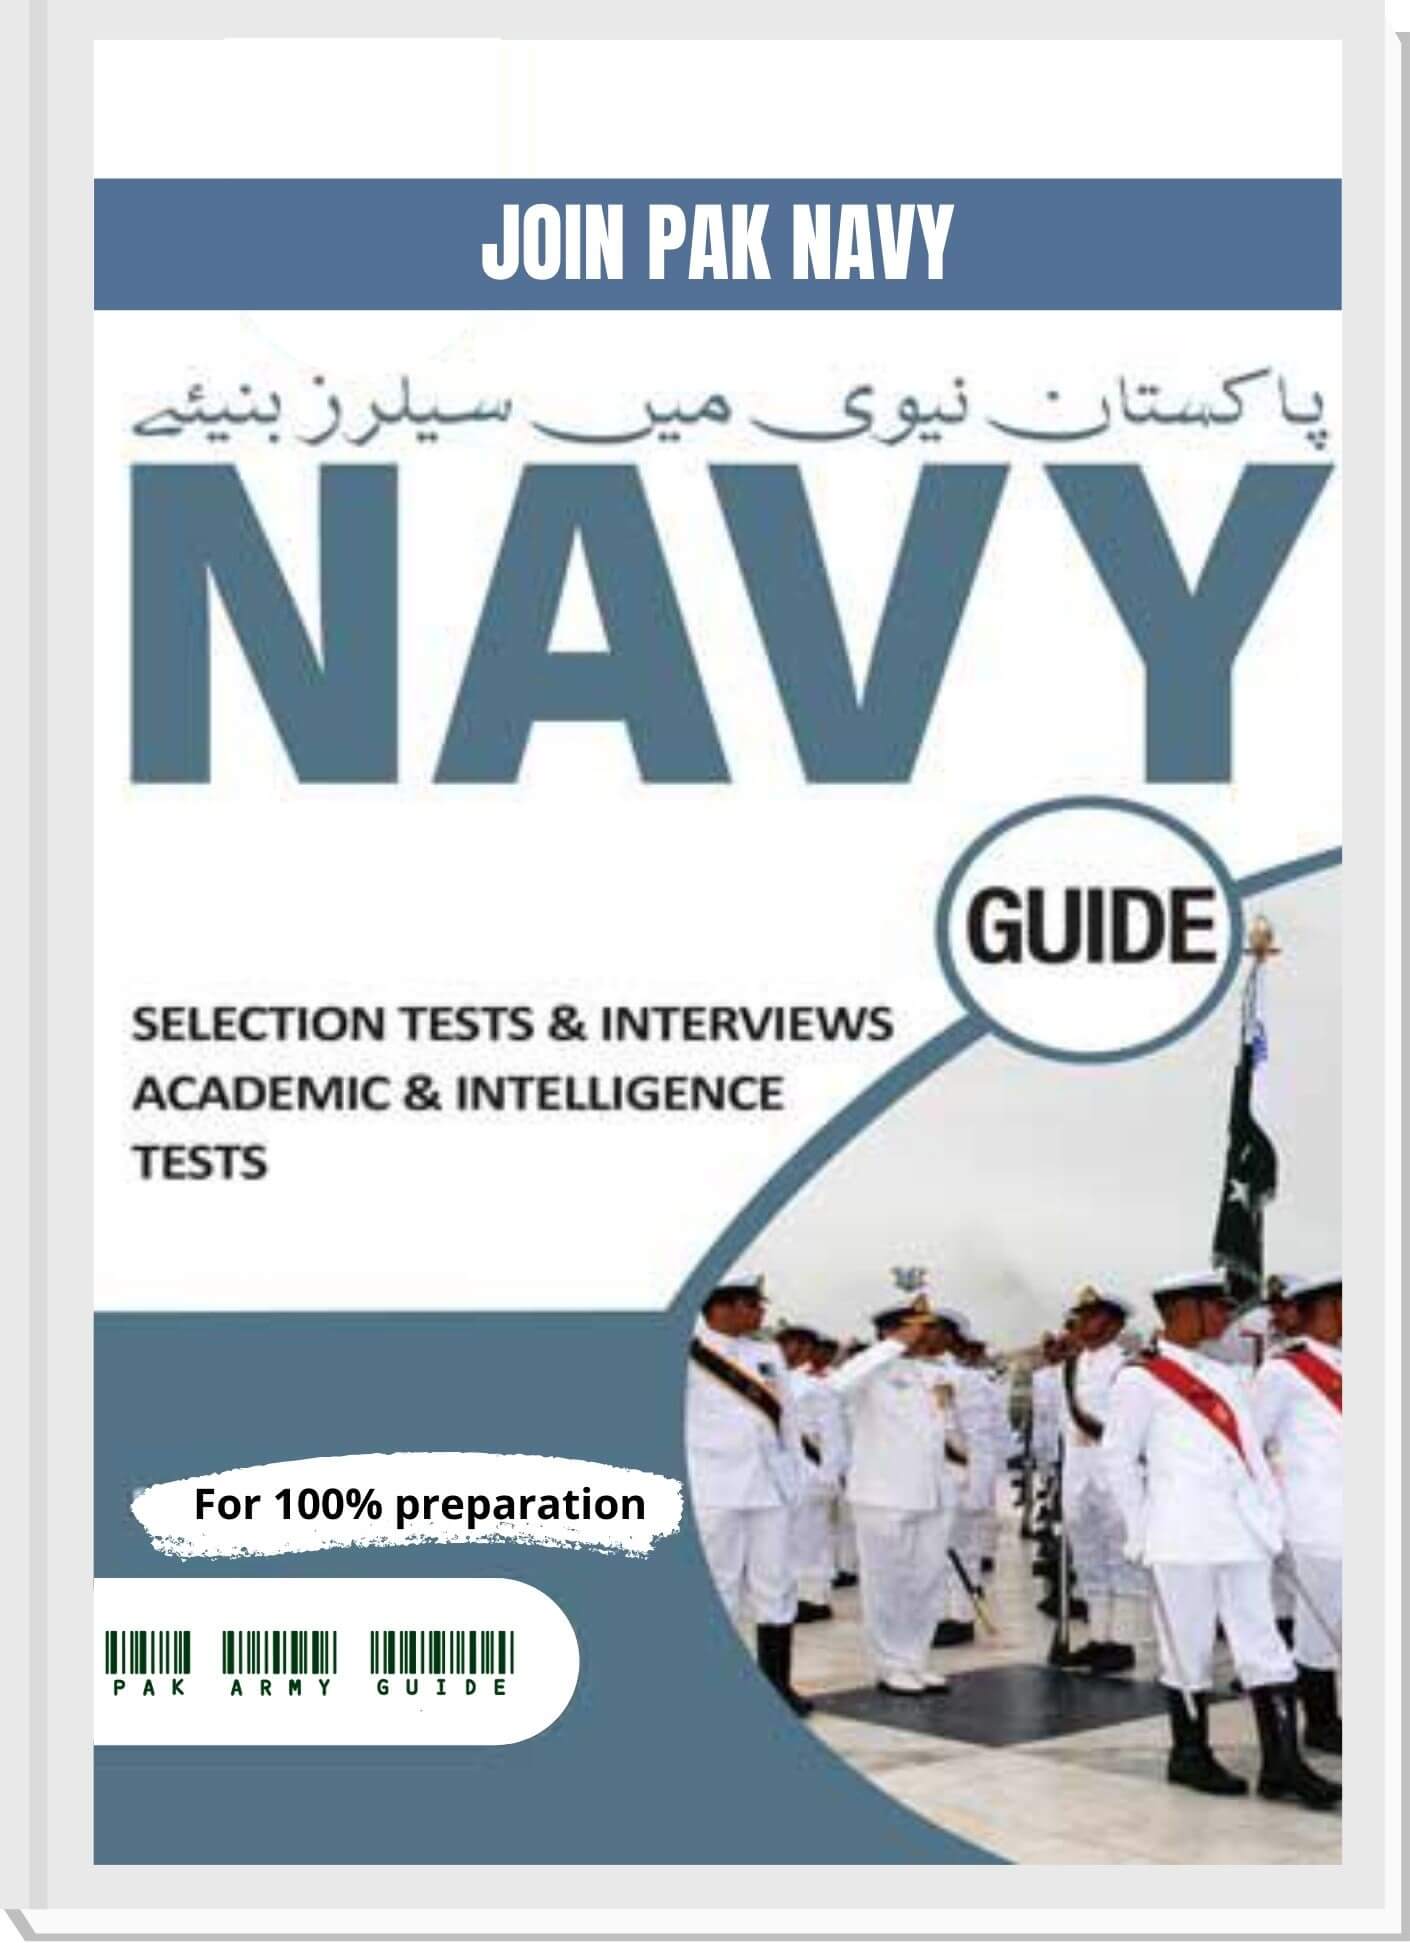 PAK Navy Guide Book | Join PAK Navy | - Pak Army Guide